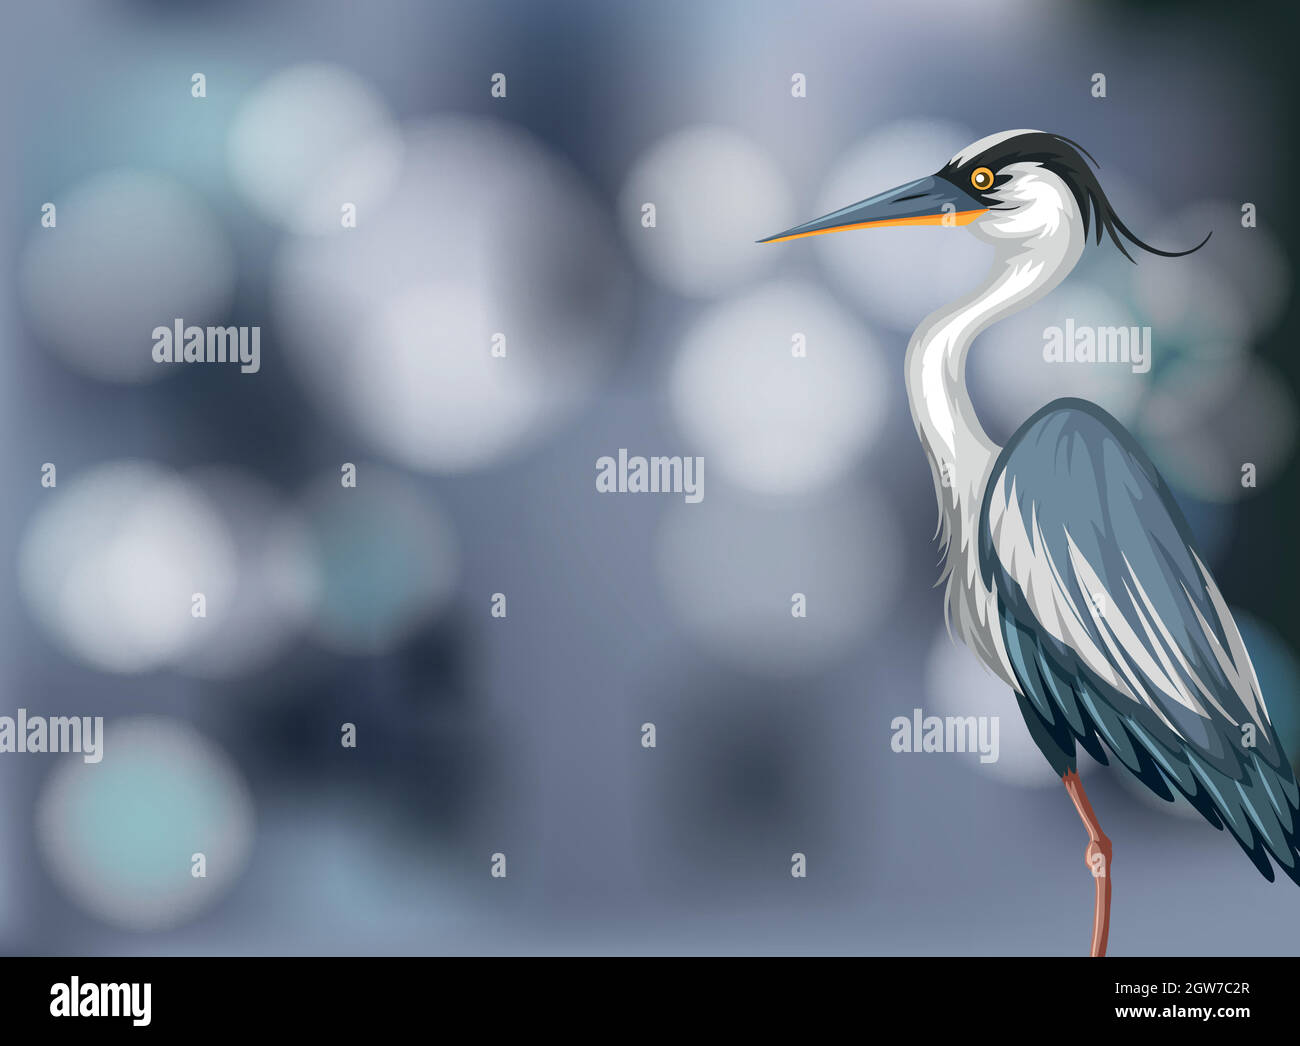 A heron on blurry background Stock Vector